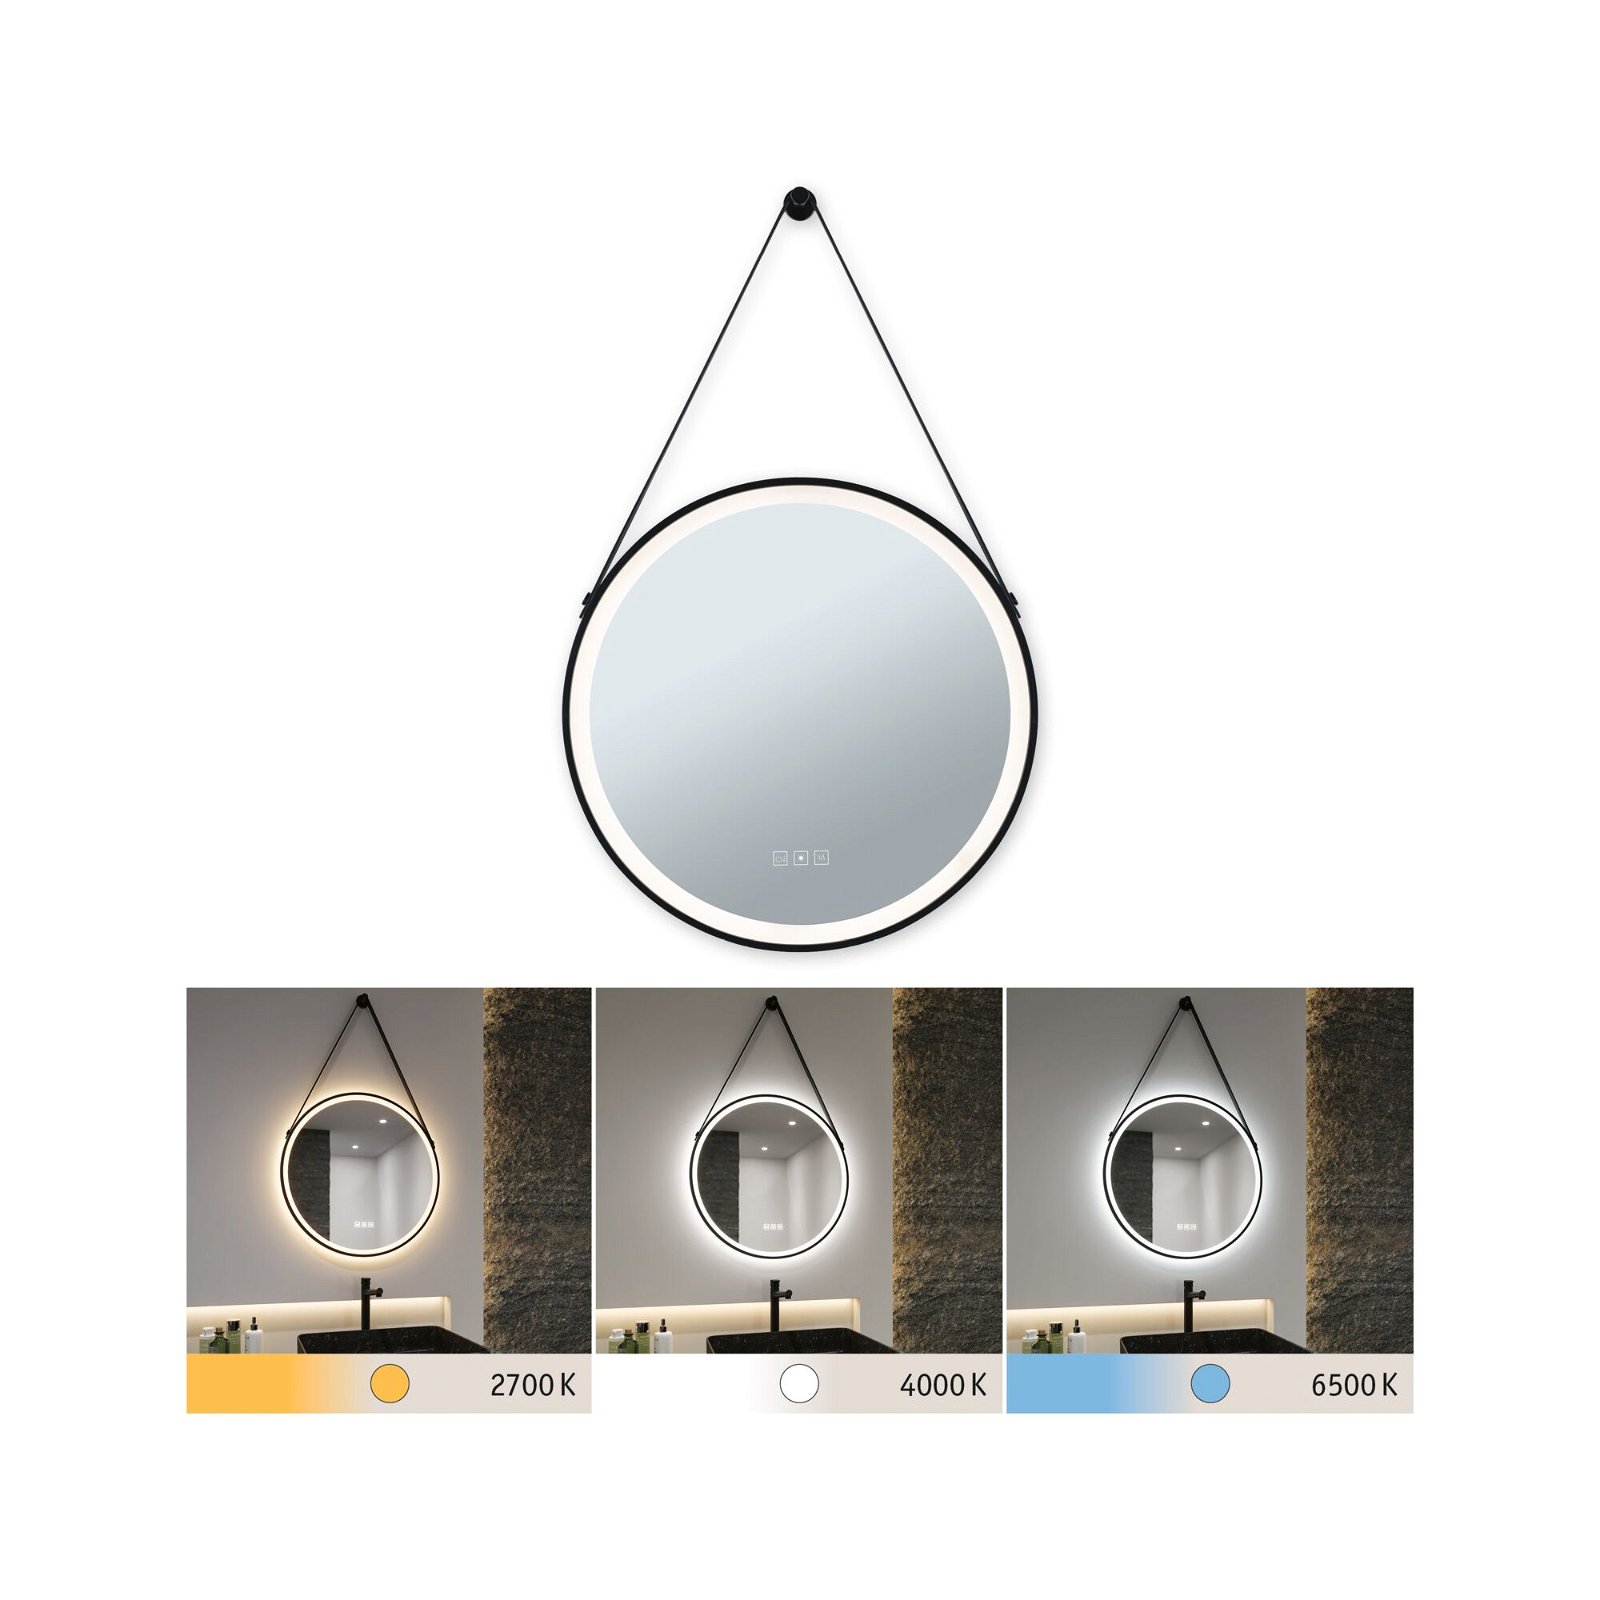 LED Illuminated mirror Mirra IP44 White Switch 750lm 230V 11,5W dimmable Black/Mirror